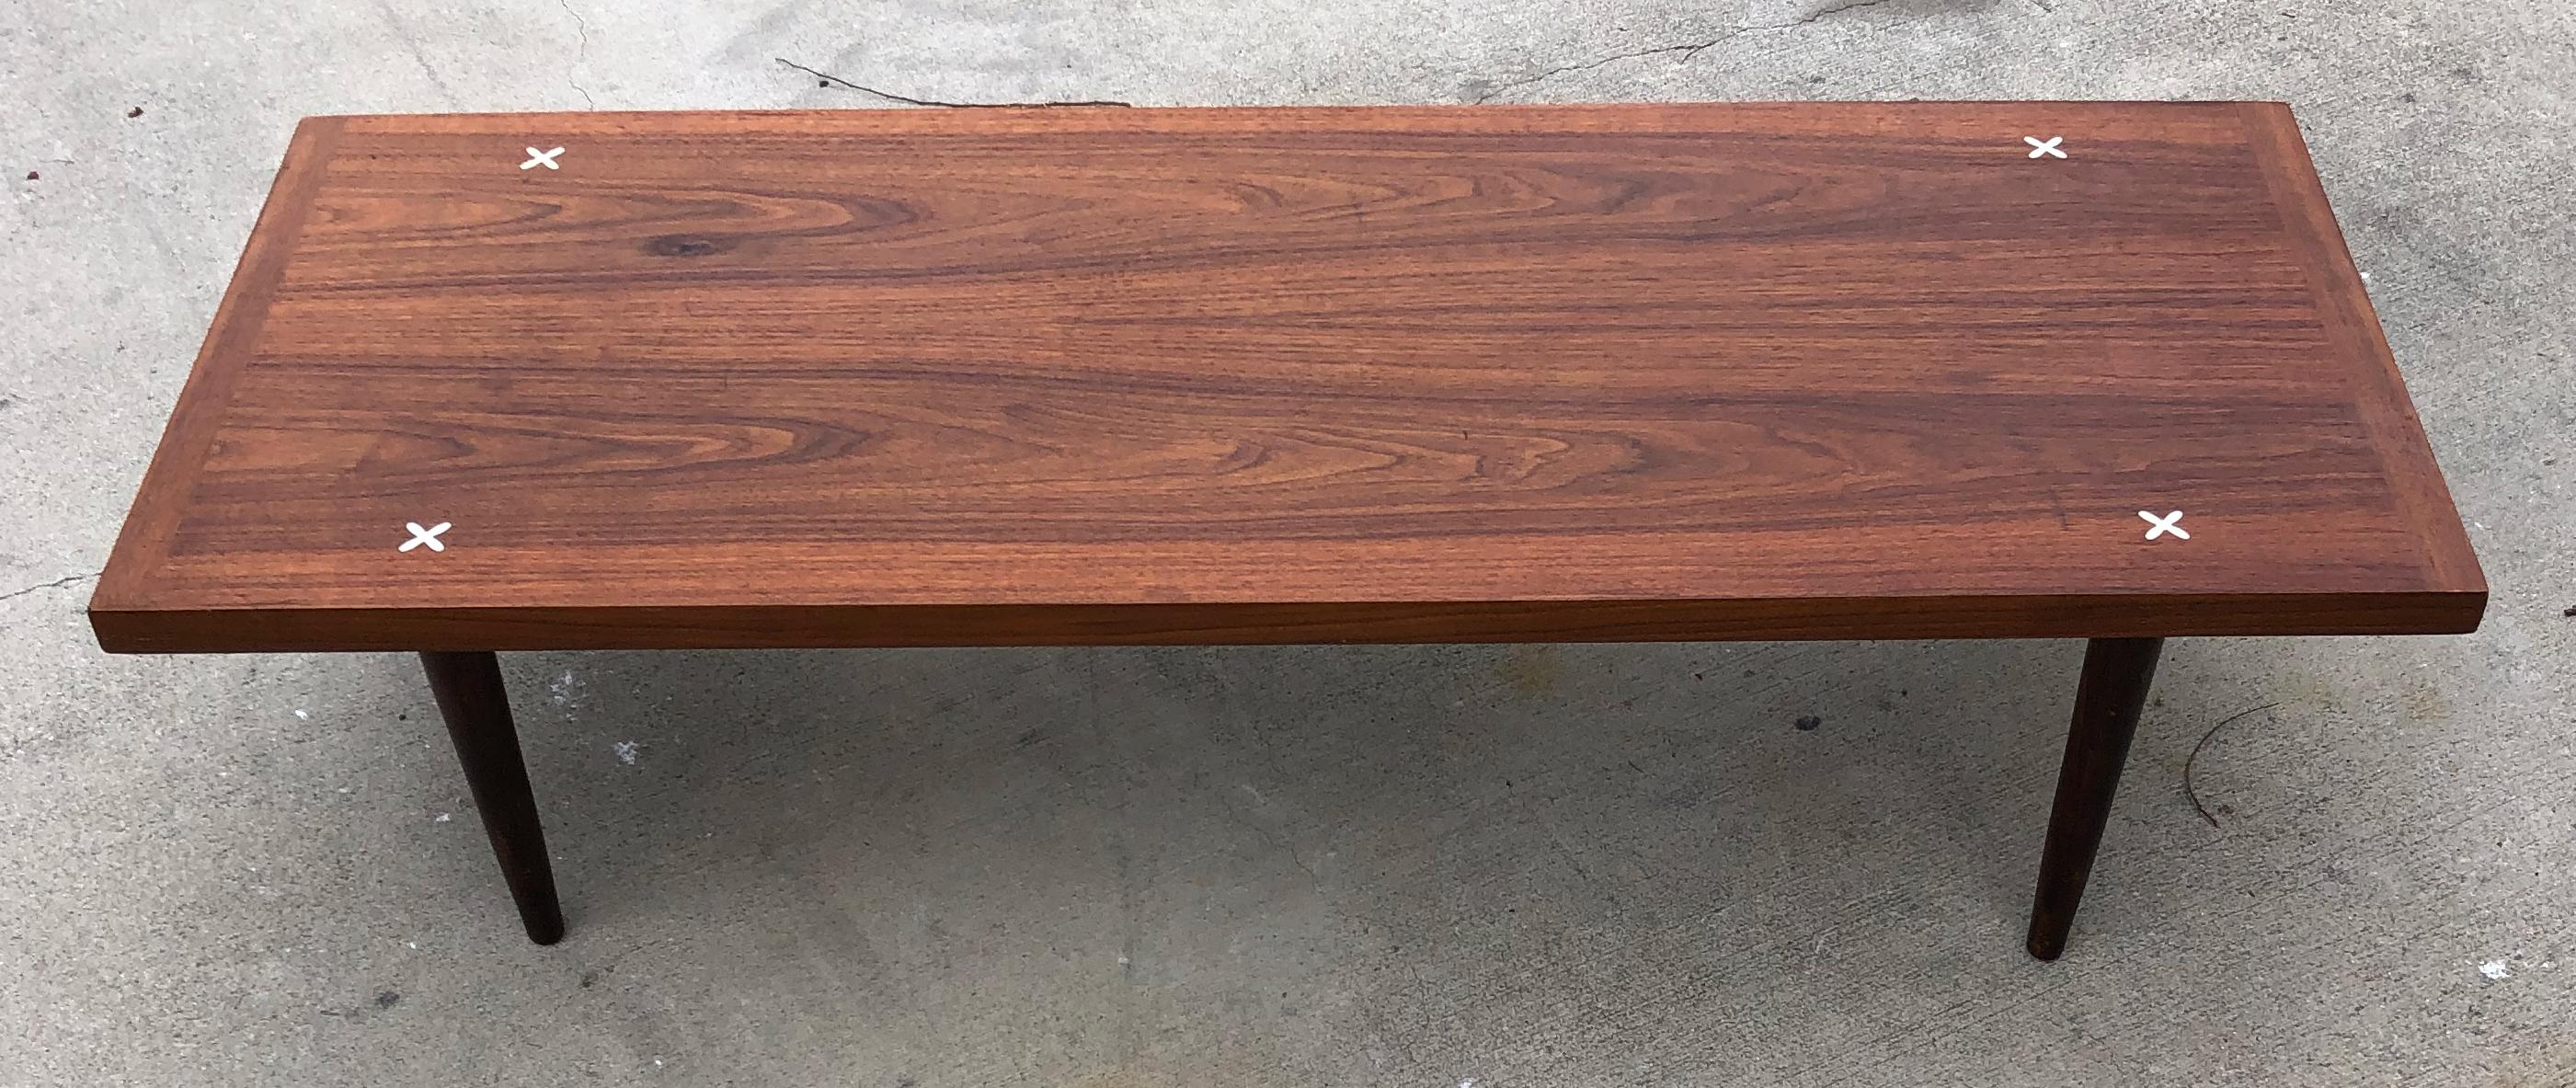 A beautiful Merton Gershun for American of Martinsville Mid Century X inlaid coffee table. Chic, beautiful simple line with a touch of fantasy. This remarkable piece was made with beautiful wood aaand finished perfectly. As I like to call it aa true